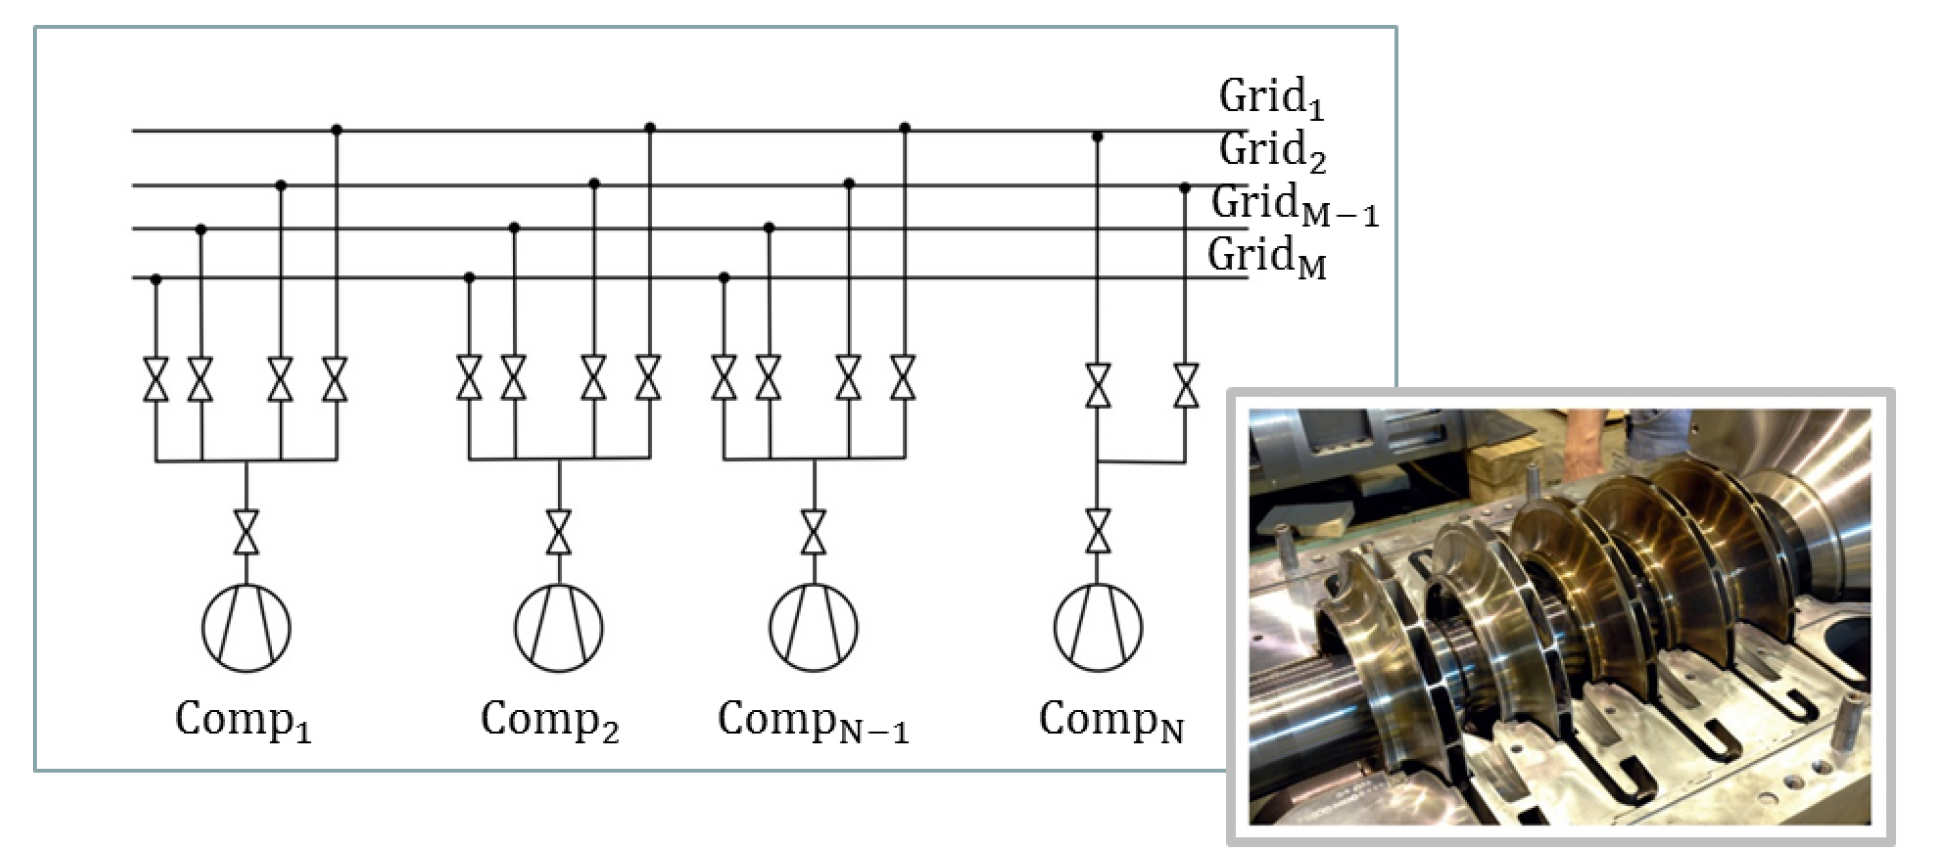 Optimization of a system with several compressors feeding a compresssed air utility grid